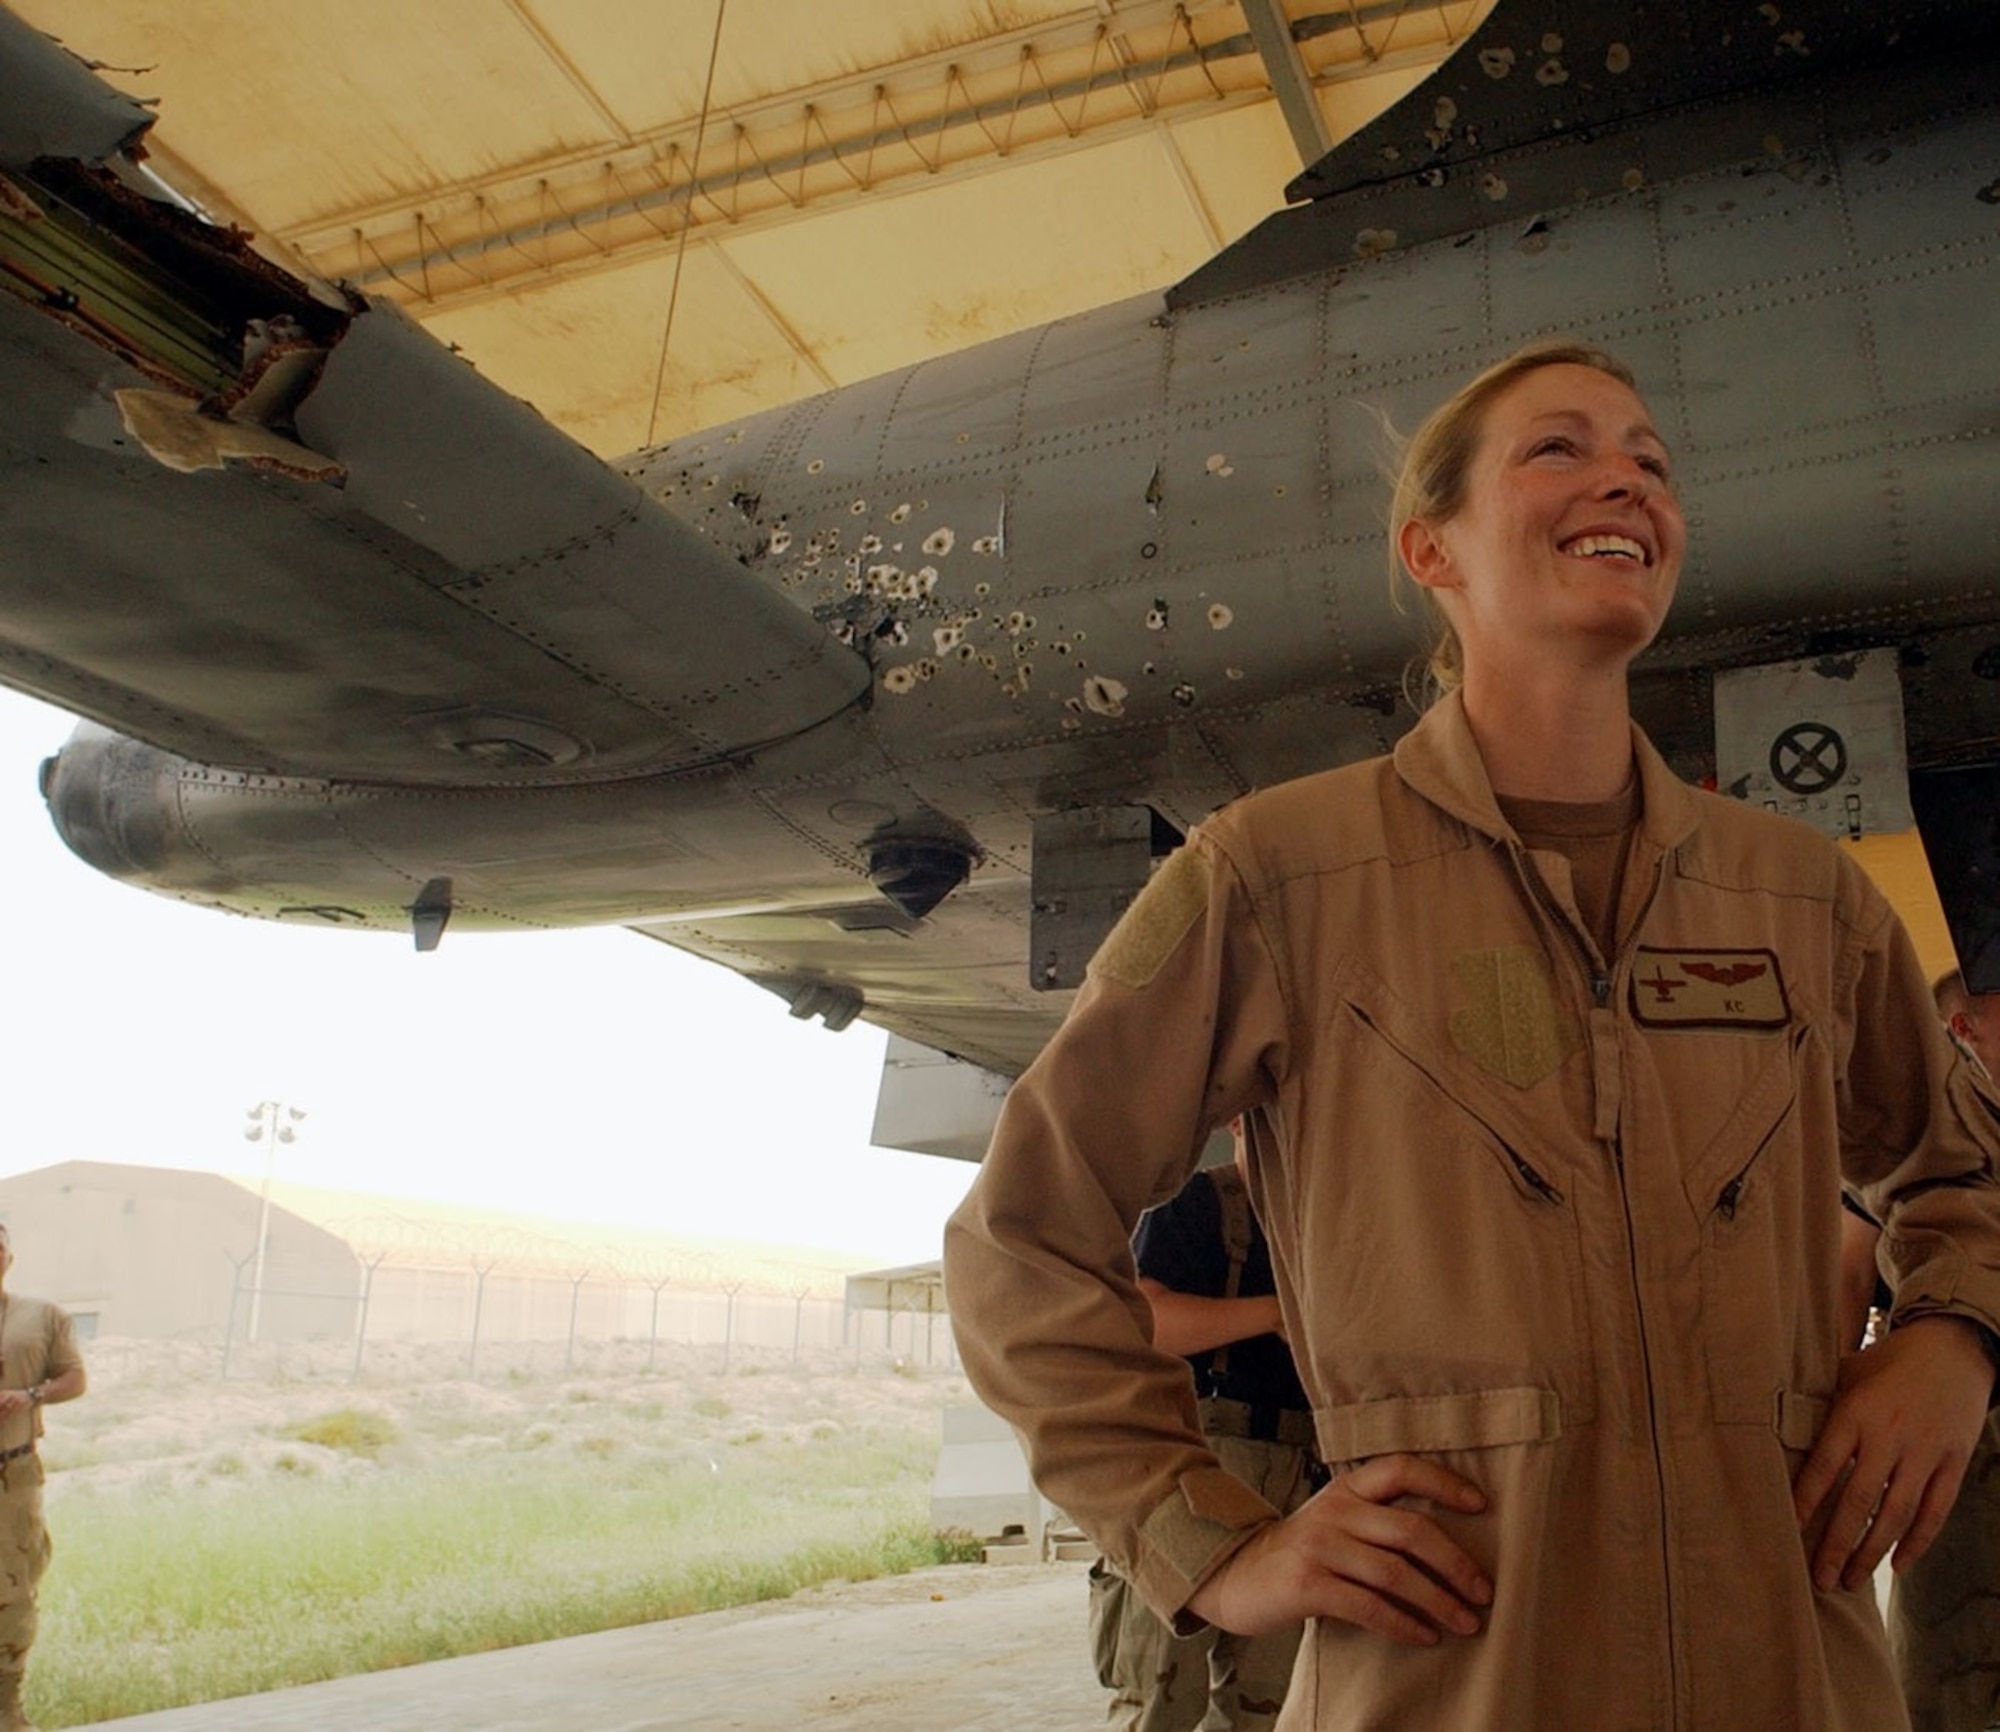 Col. Kim Campbell, Director of the Center for Character and Leadership Development, poses with her damaged A-10 Thunderbolt II after a 2003 combat mission in Iraq. Campbell is a 1997 graduate and command pilot with over 1,700 hours in the A-10.